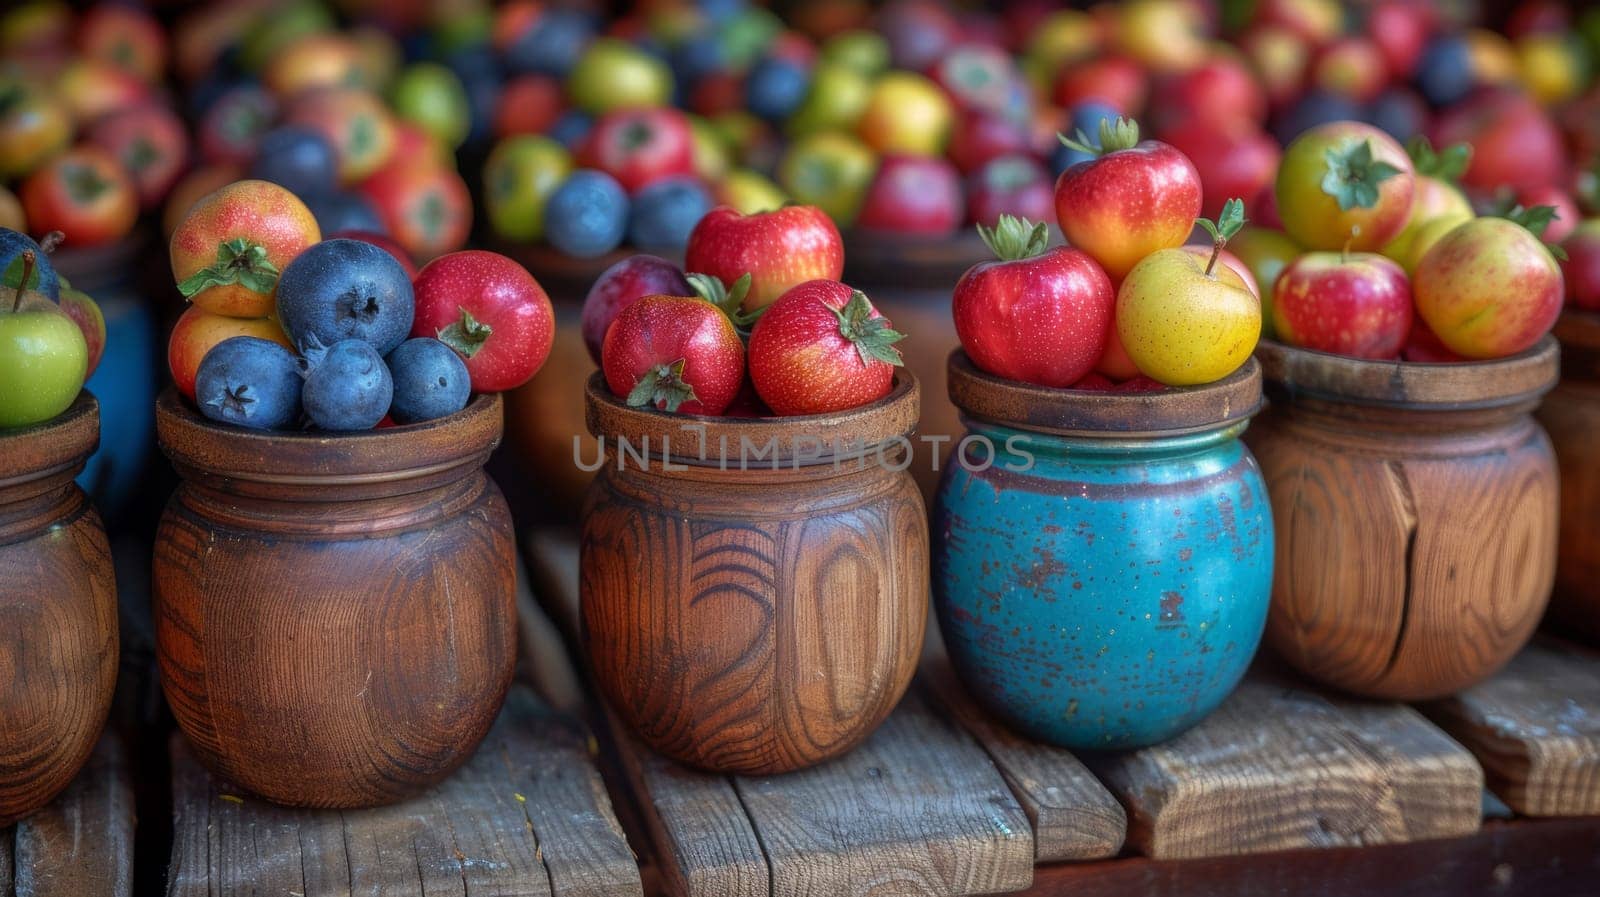 A row of wooden crates filled with apples and blueberries, AI by starush